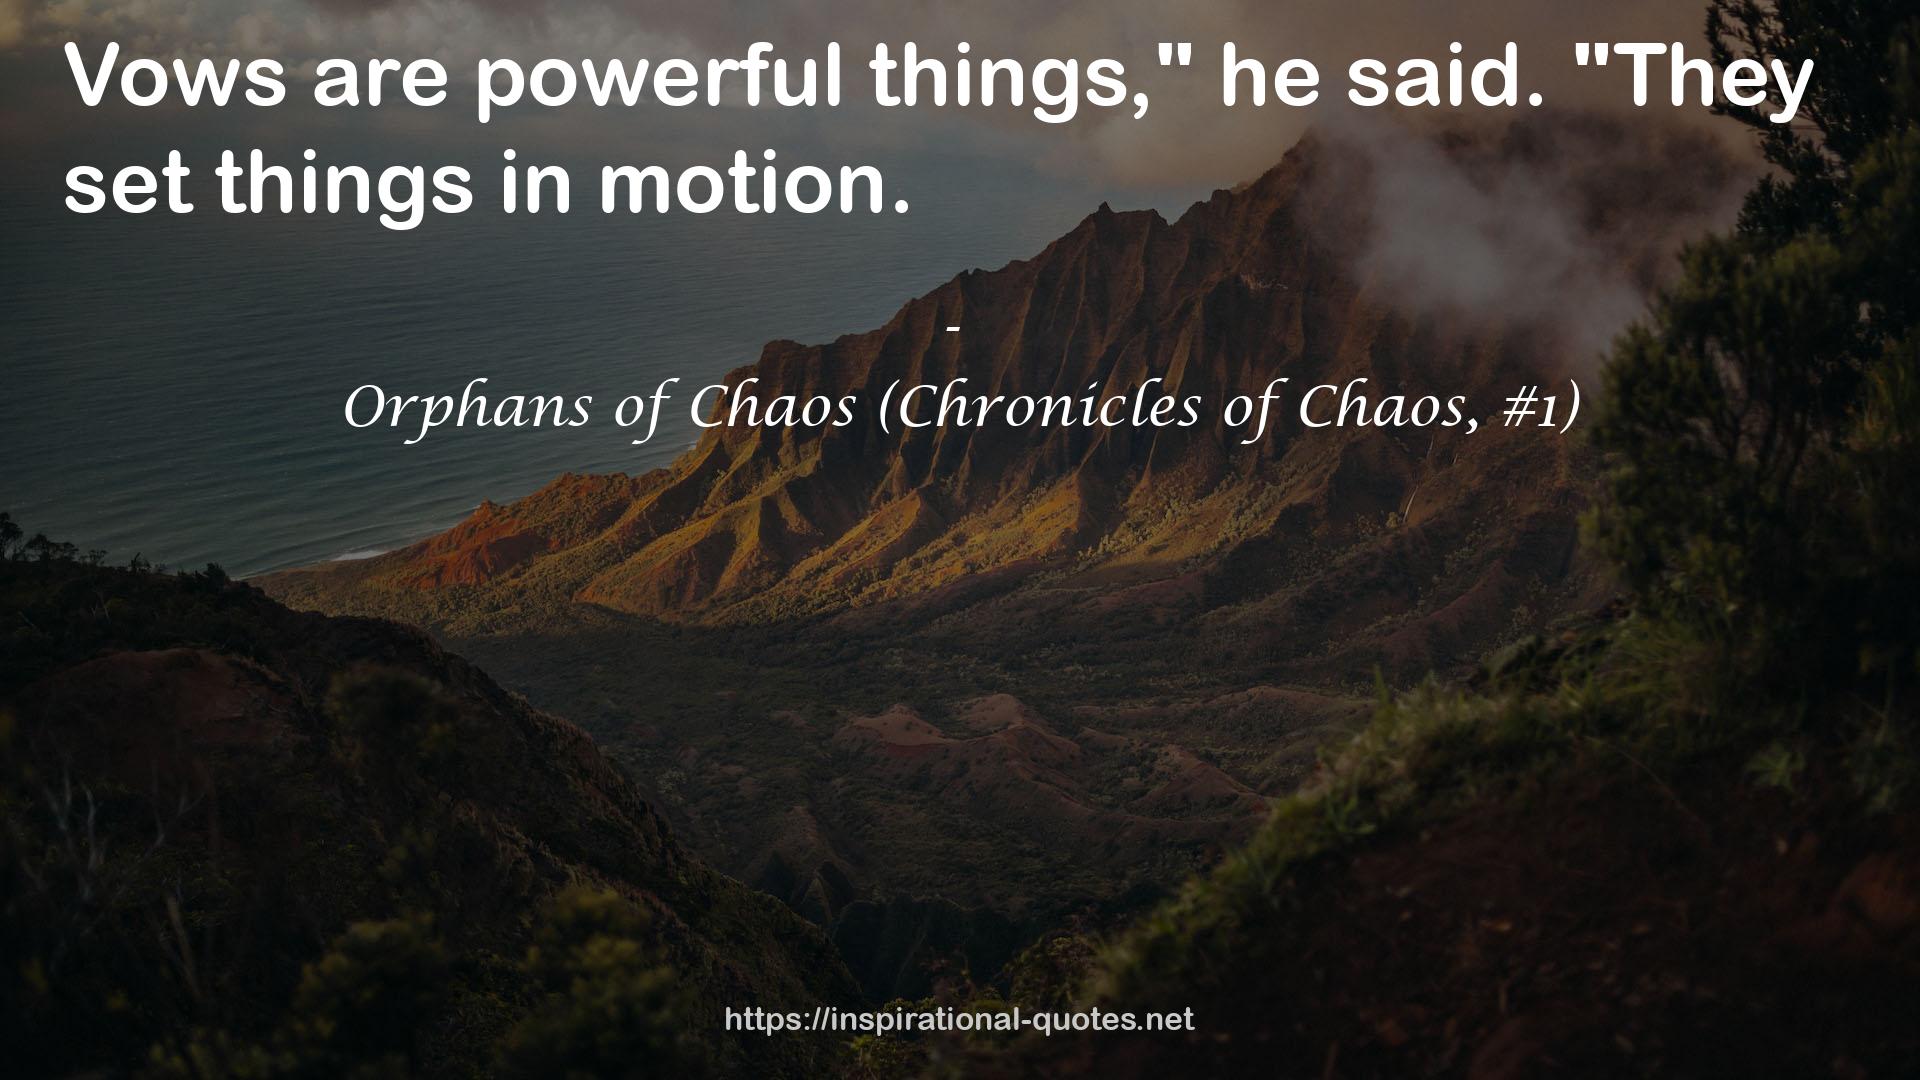 Orphans of Chaos (Chronicles of Chaos, #1) QUOTES